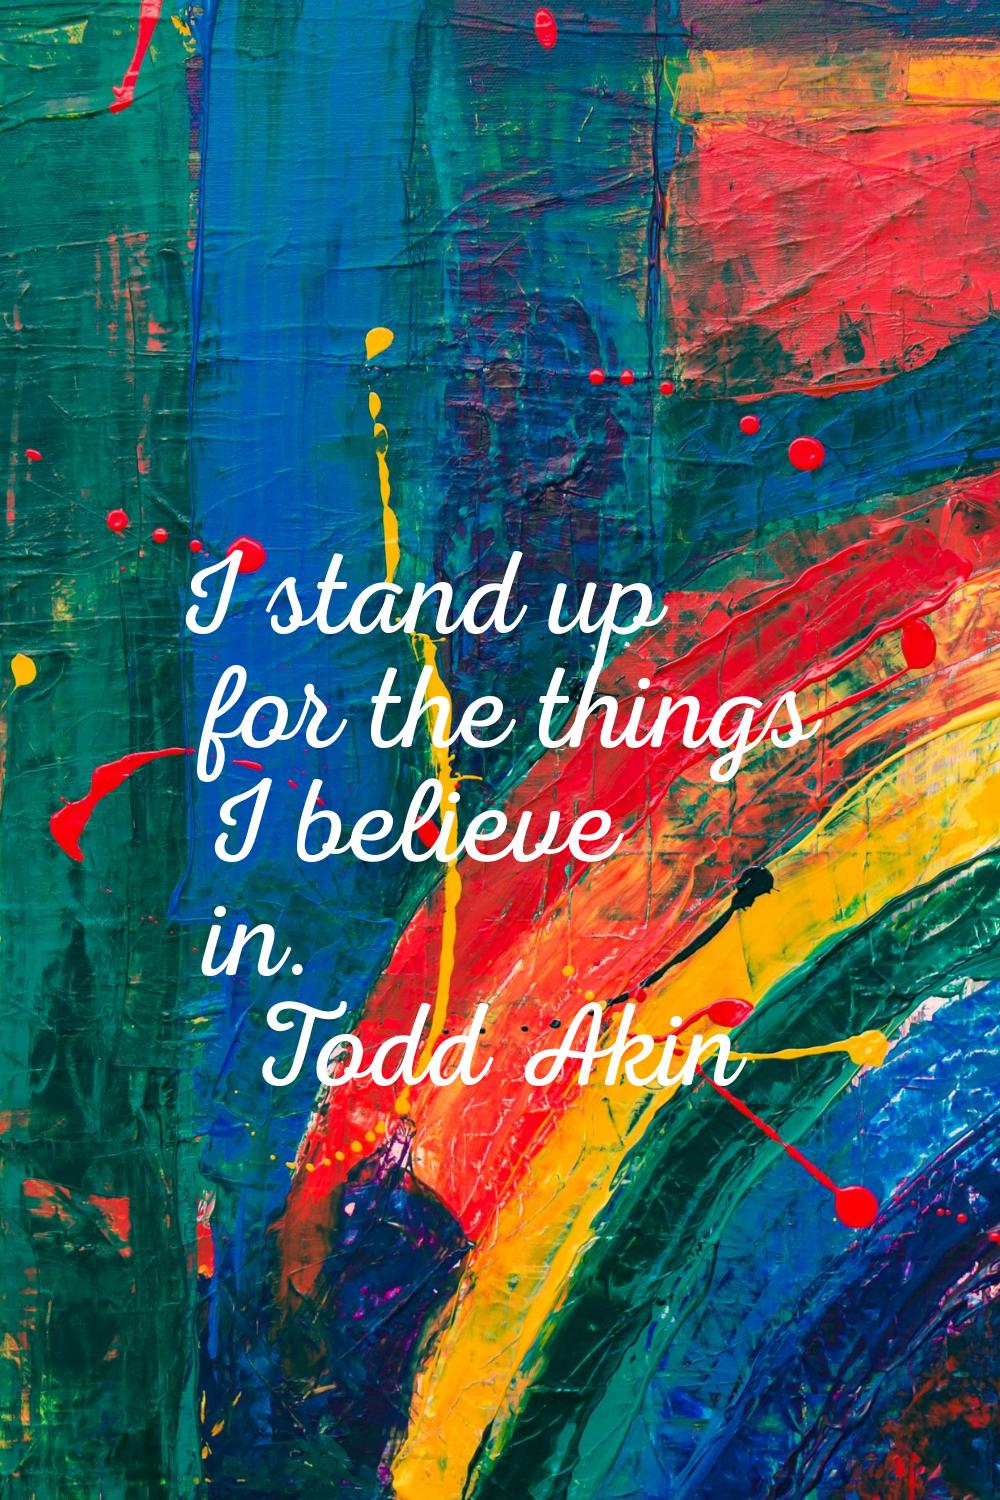 I stand up for the things I believe in.